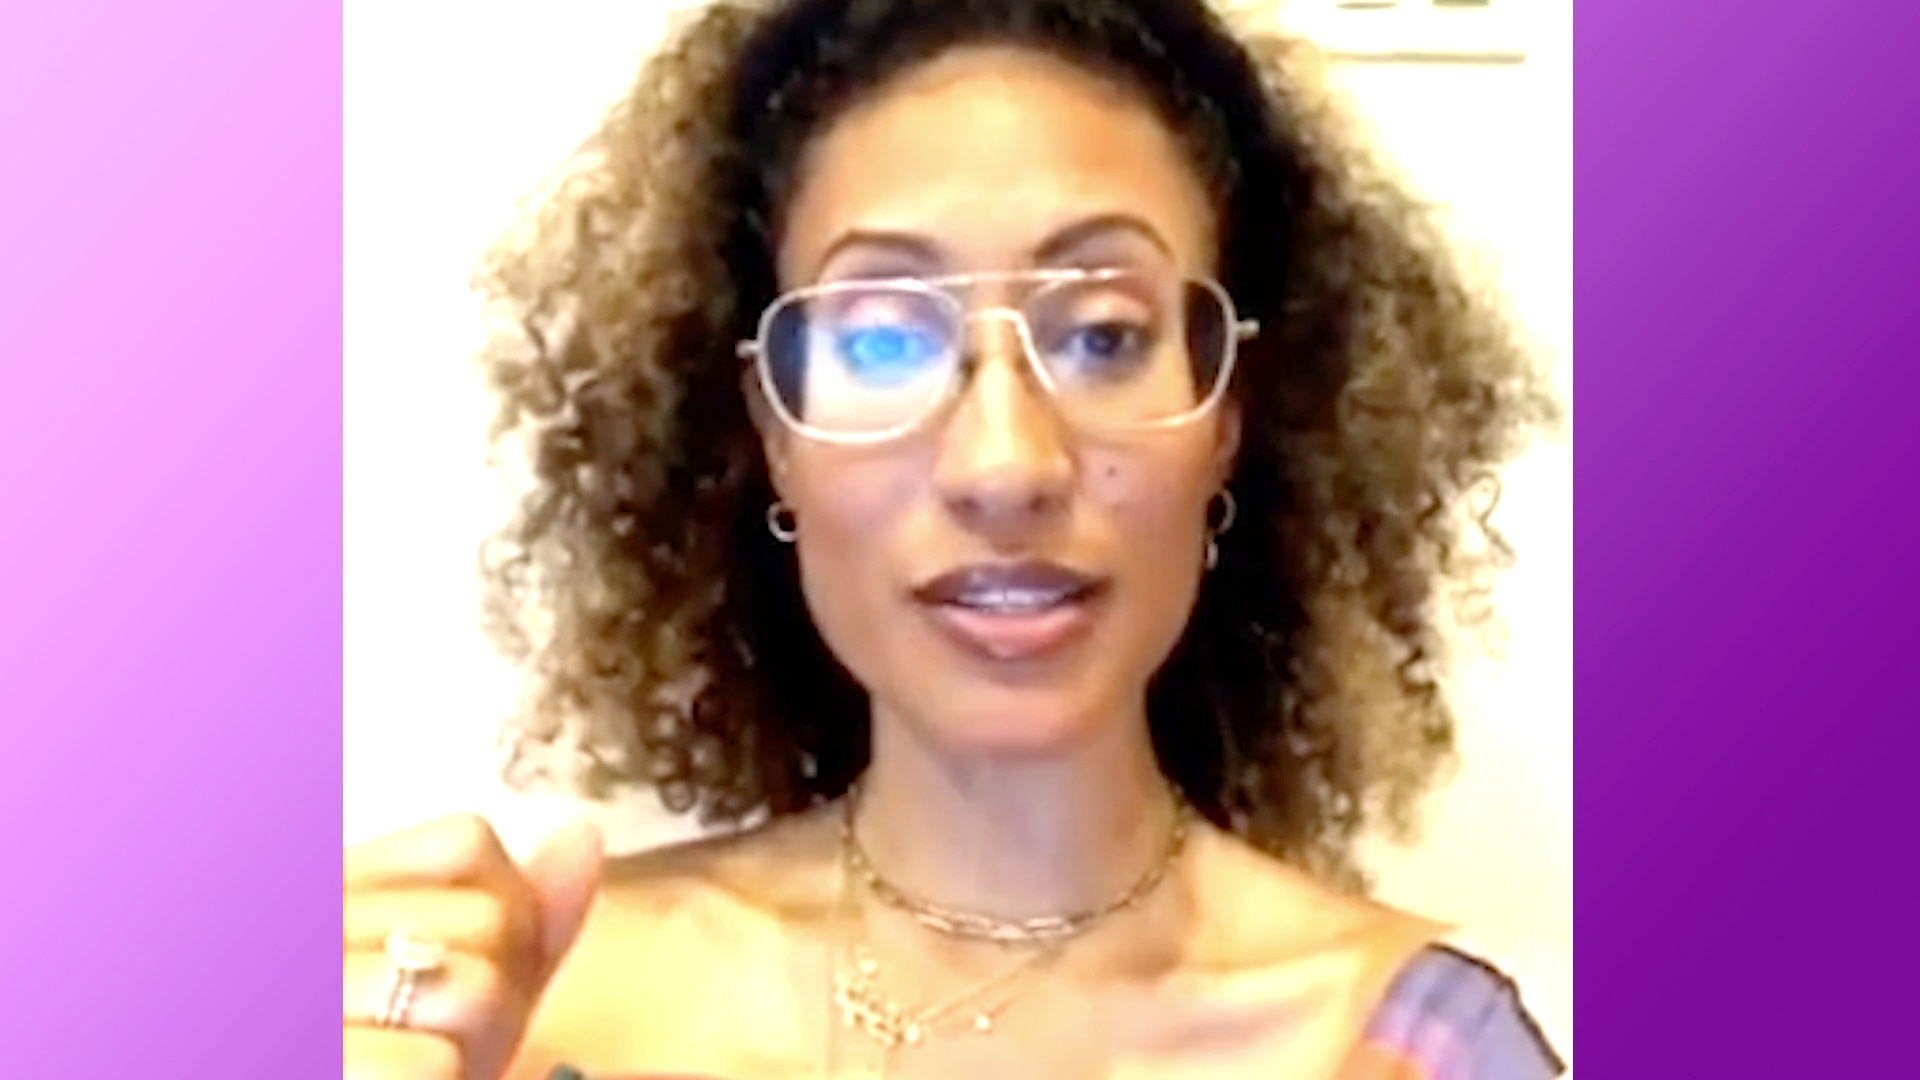 Elaine Welteroth: "We Have to Change the Culture Around Voting"